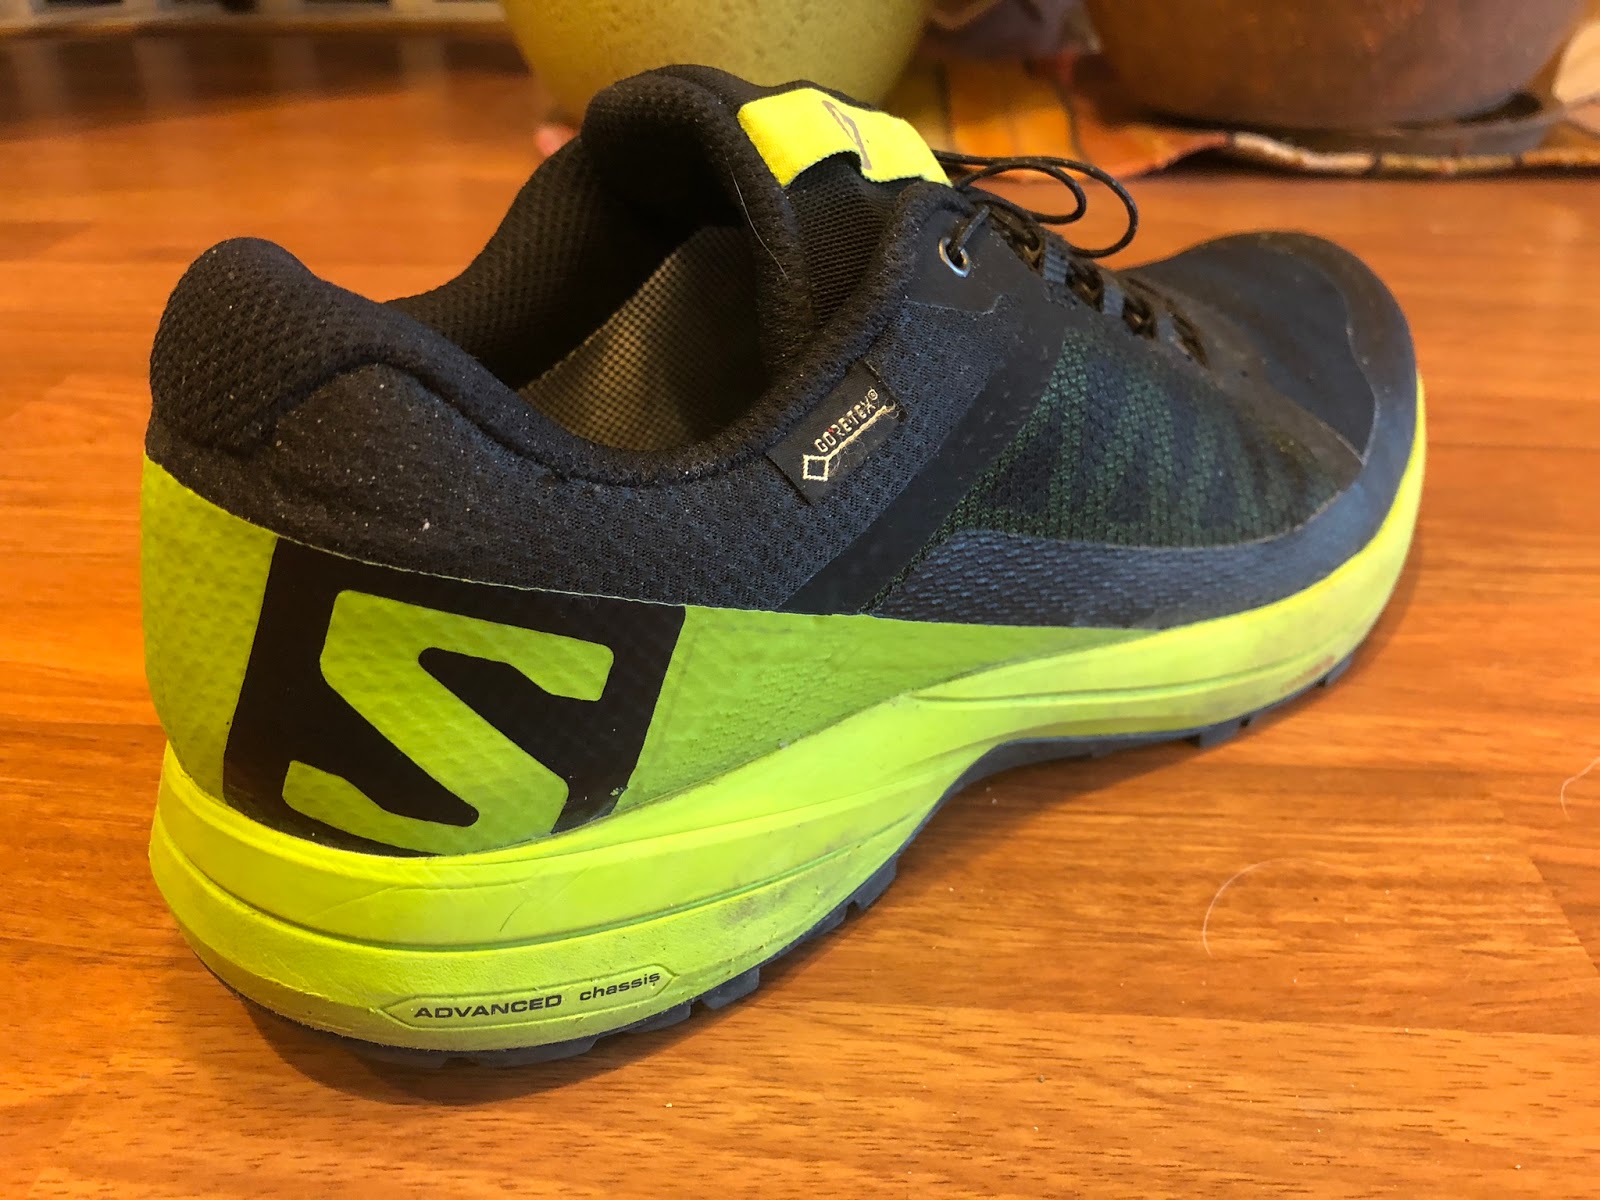 Road Trail Run: Salomon XA Elevate GTX Review - All of the Rugged, Versatile Greatness of the XA Elevate with Waterproof Protection